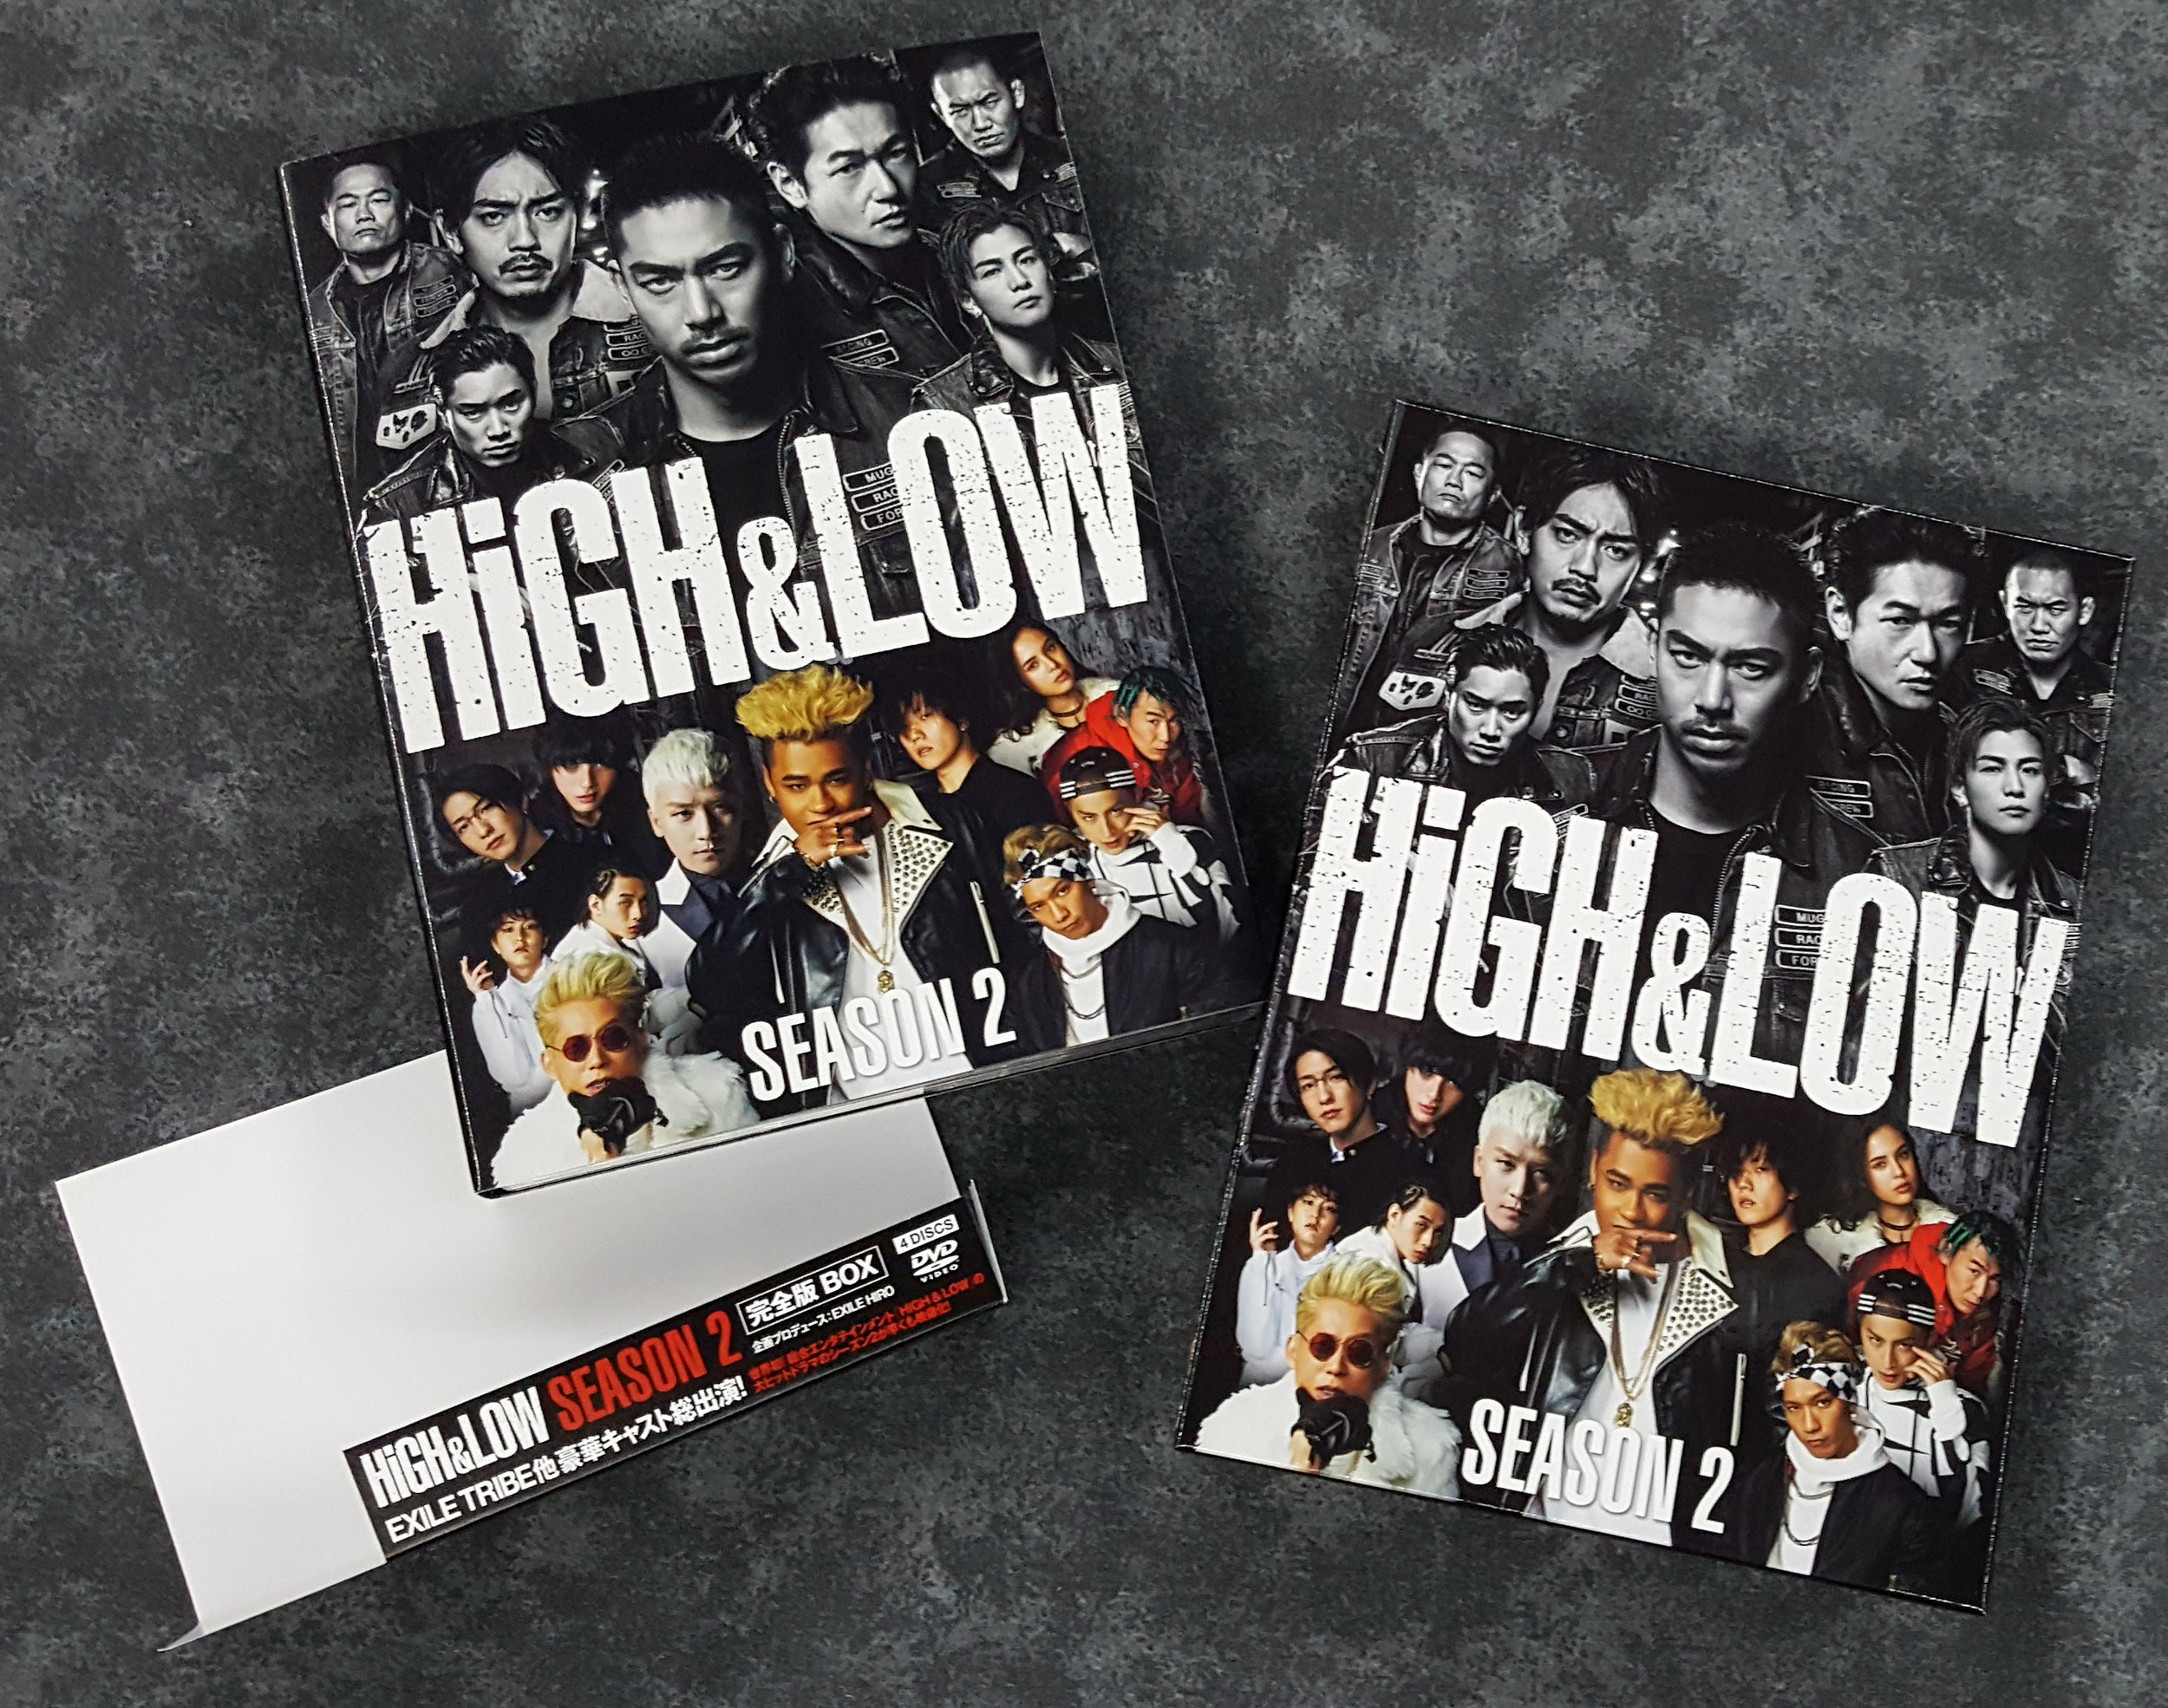 16 High Low Season 2 Boxed Set With Hmv Pre Order Benefits Poster My Bigbang Collection